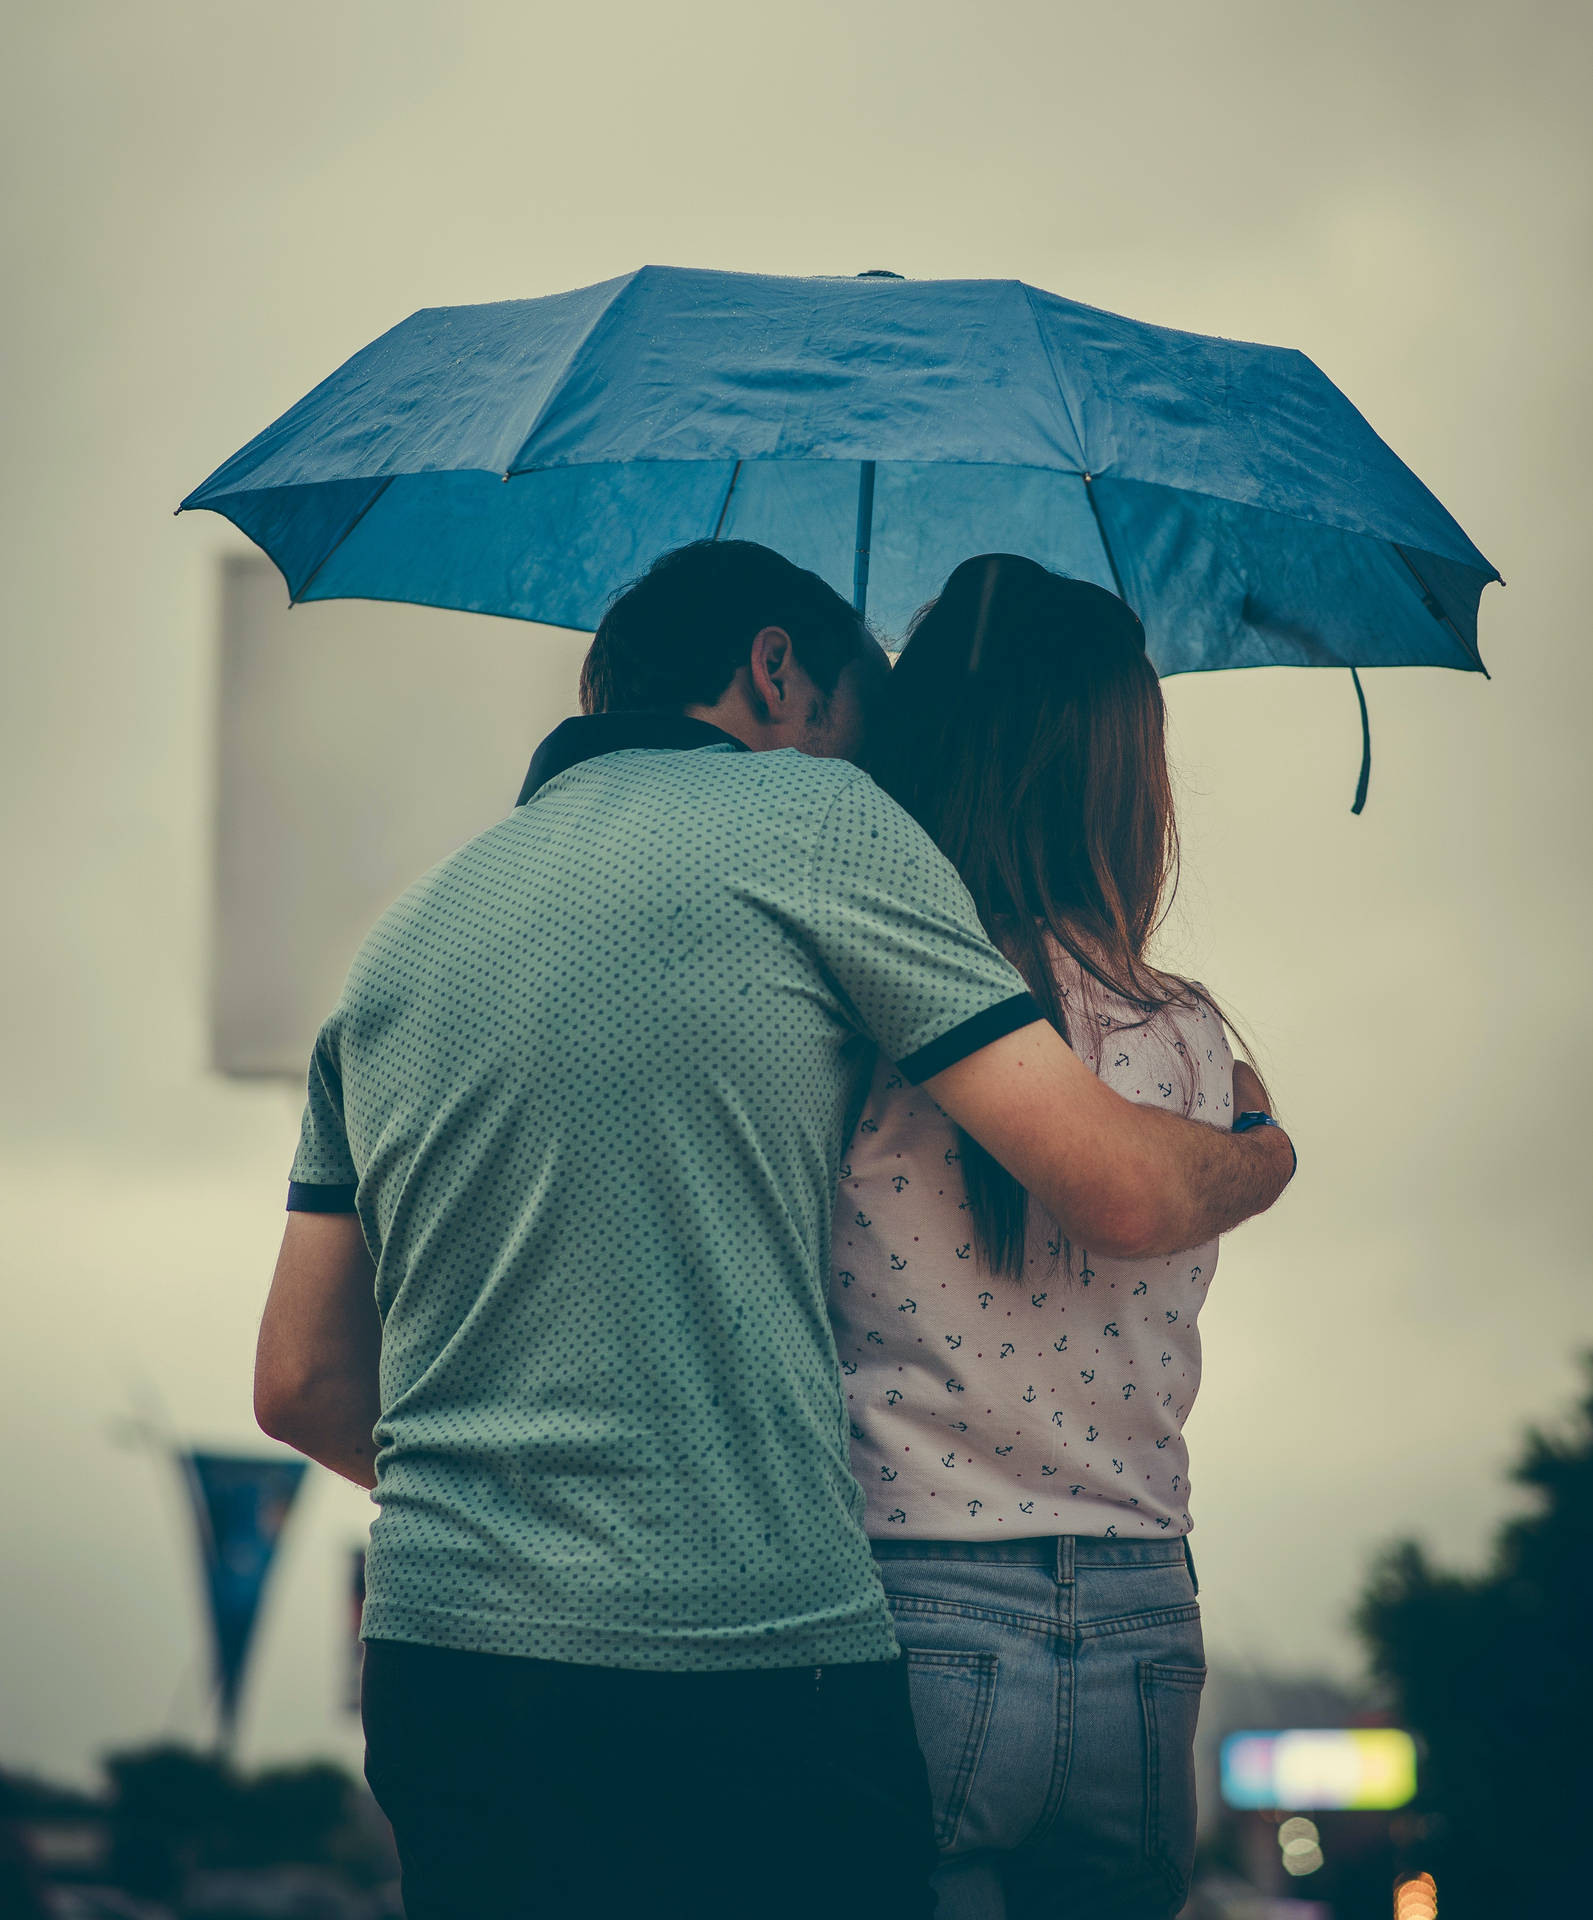 couple holding hands in the rain wallpaper